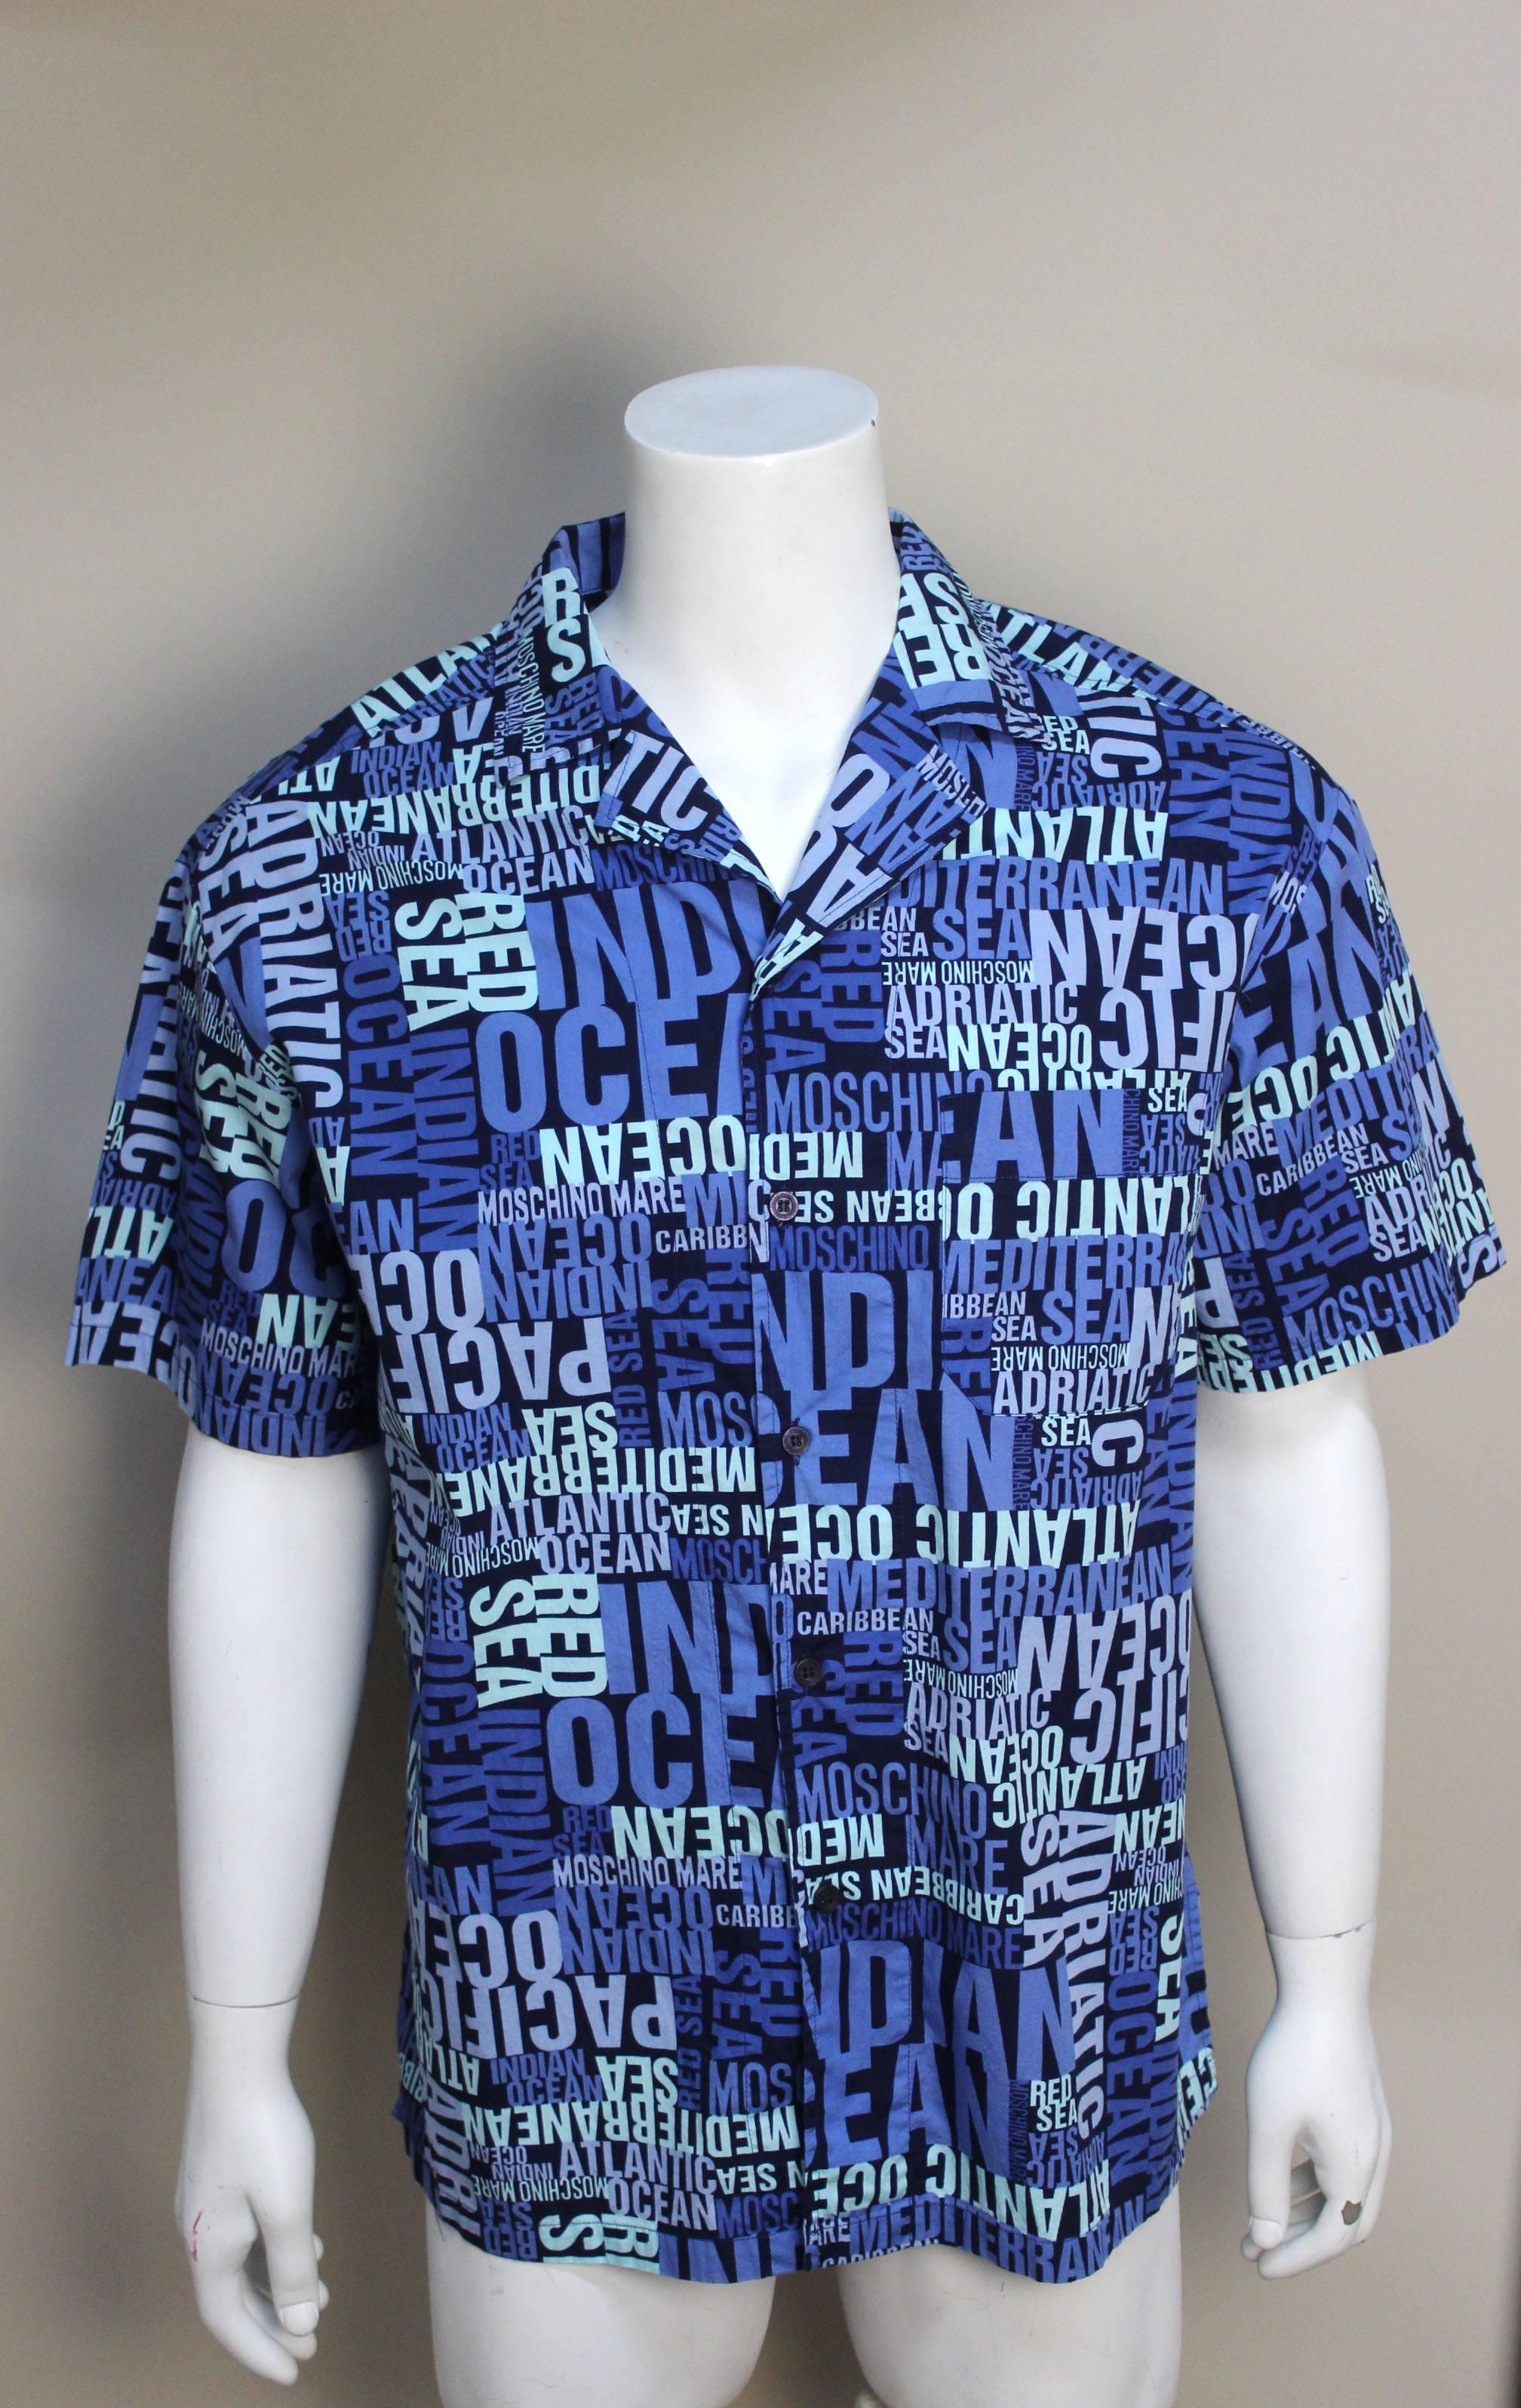 This is the perfect resort shirt. Moschino has spelled out all the world's oceans and lakes in bold lettering in varying shades of blue on a soft cotton navy background.